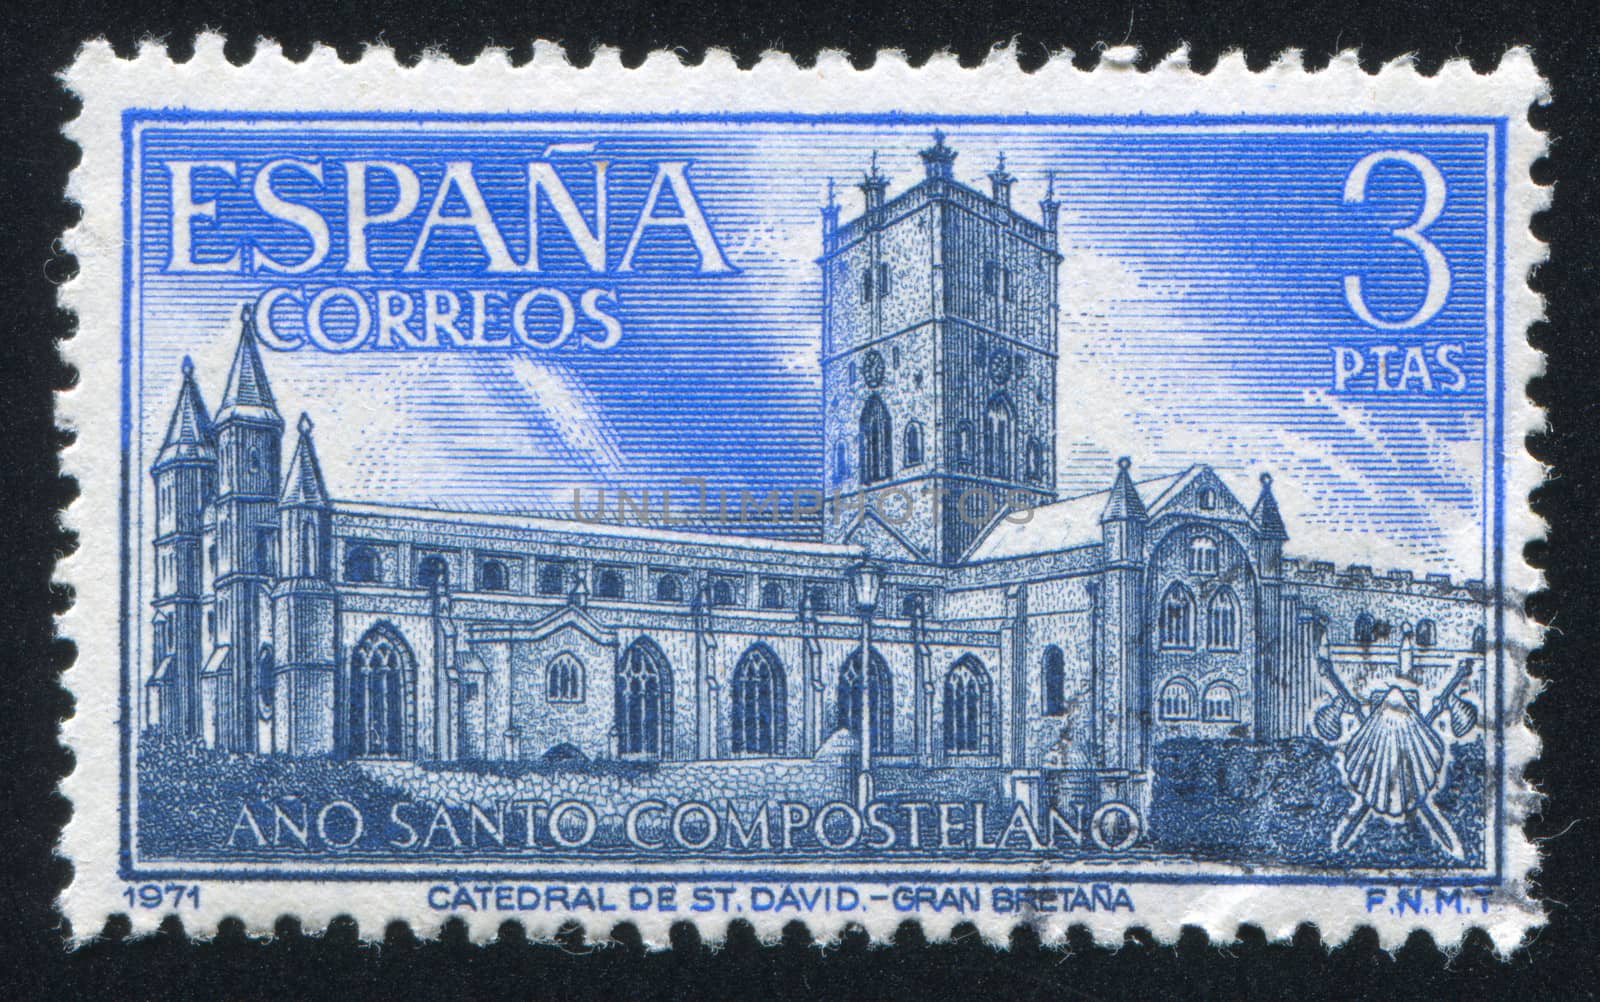 SPAIN - CIRCA 1971: stamp printed by Spain, shows Cathedral of St. David, Wales, circa 1971